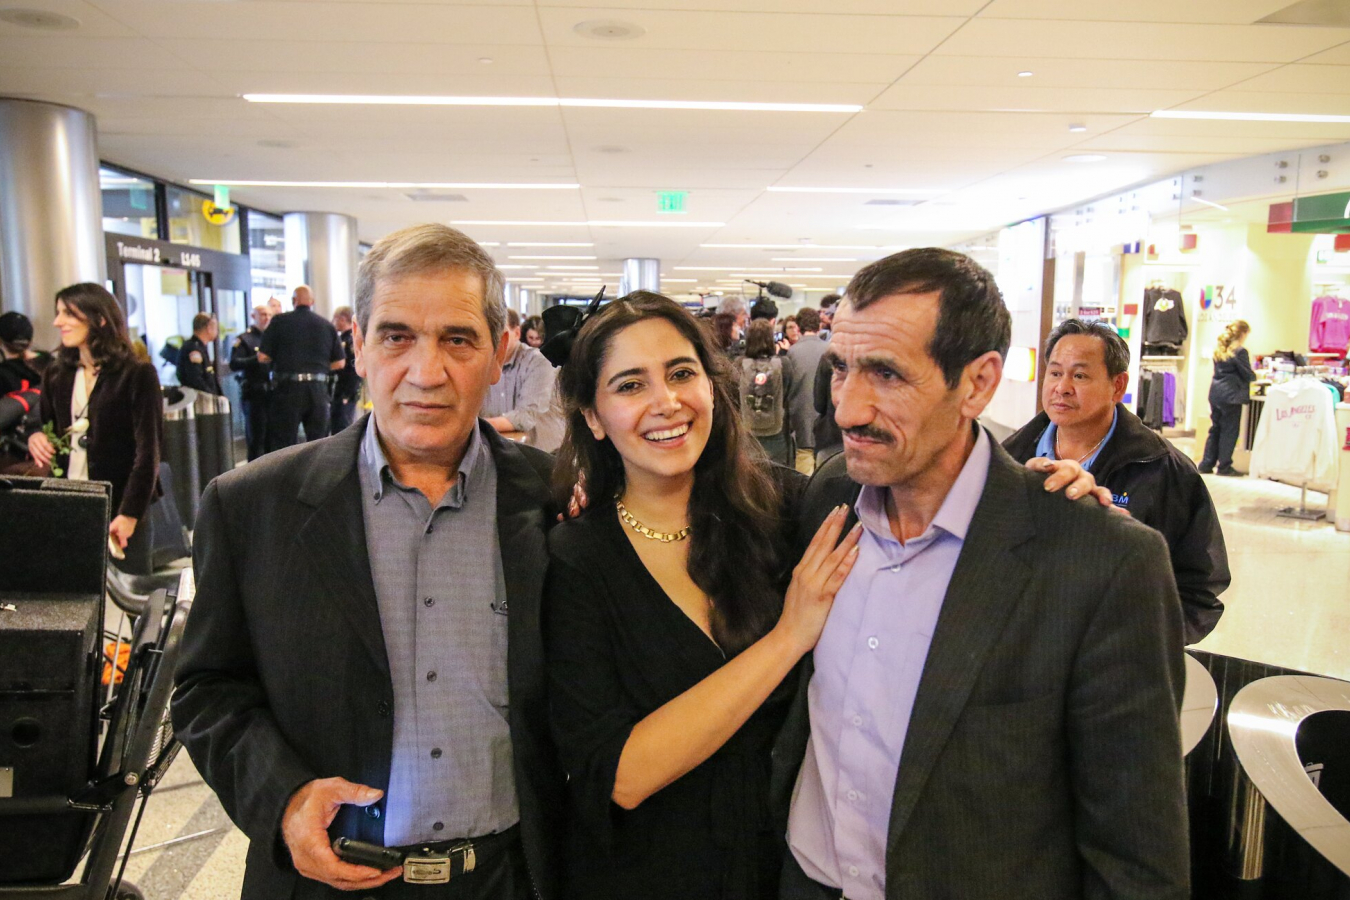 Mayor Garcetti welcomes Mr. Vayeghan. The first person subjected to the President's travel ban who was able to return to US following Court Order. 2 February 2017